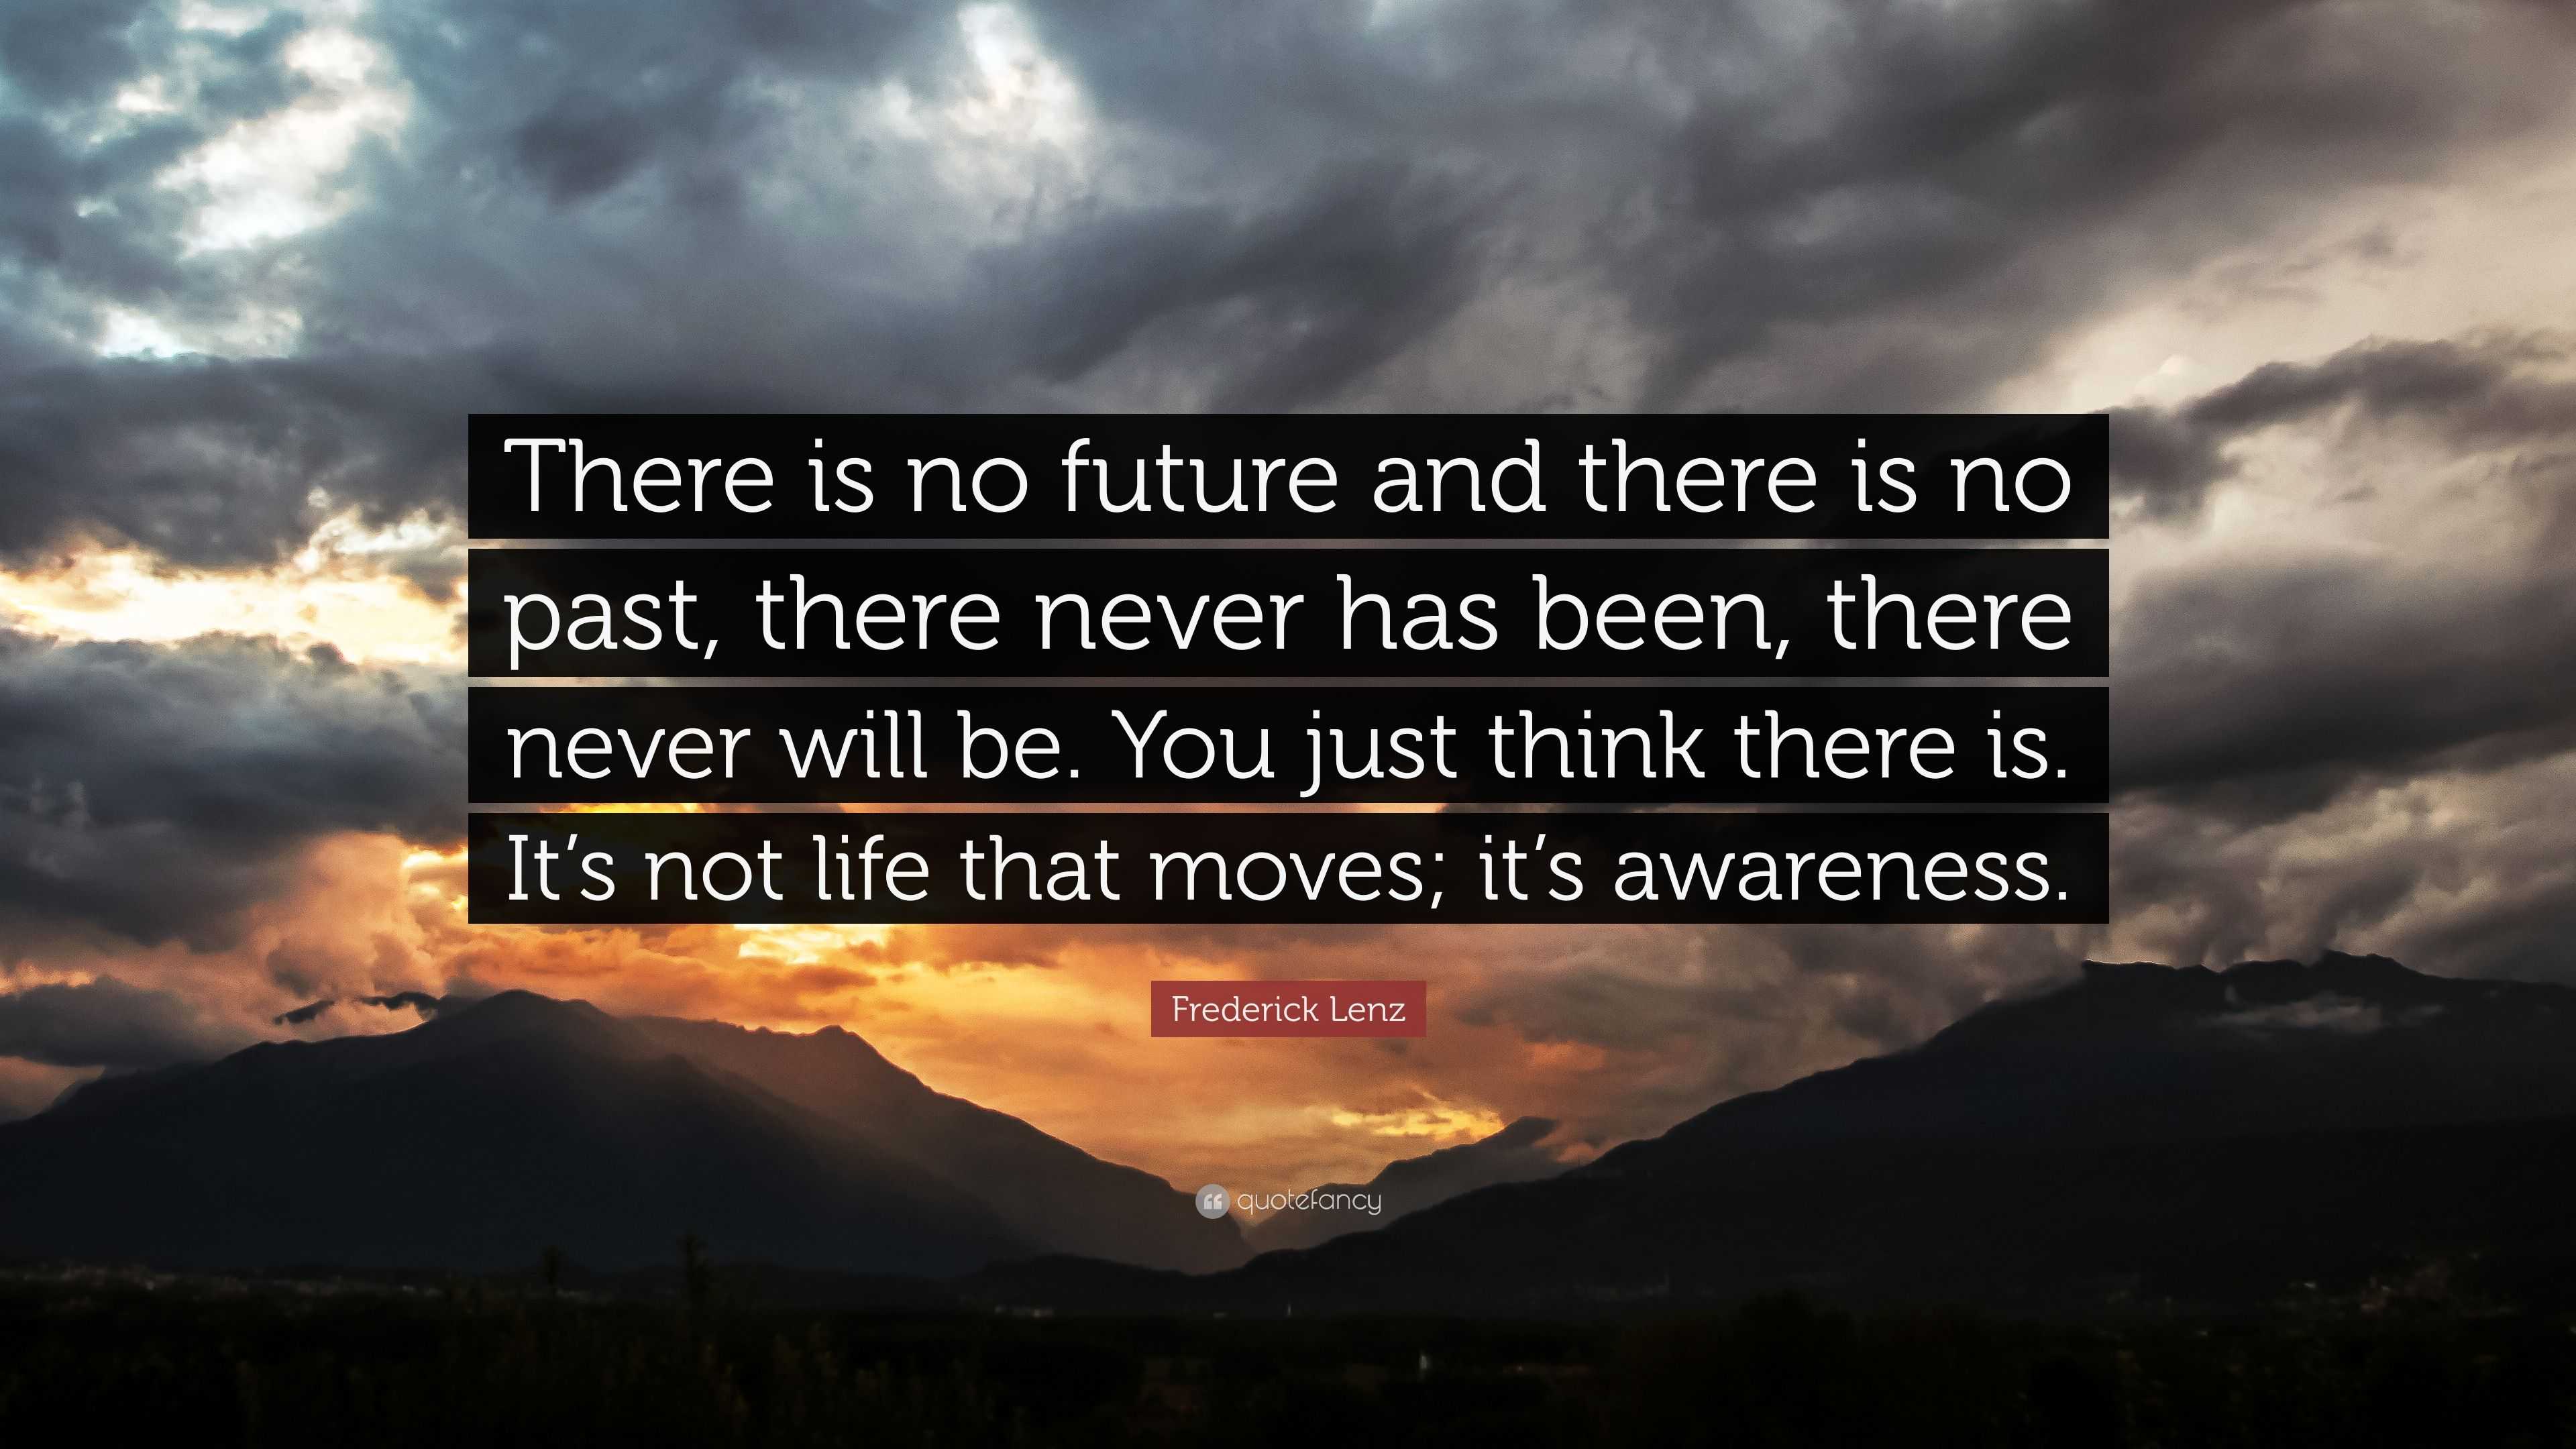 Frederick Lenz Quote: “There is no future and there is no past, there ...